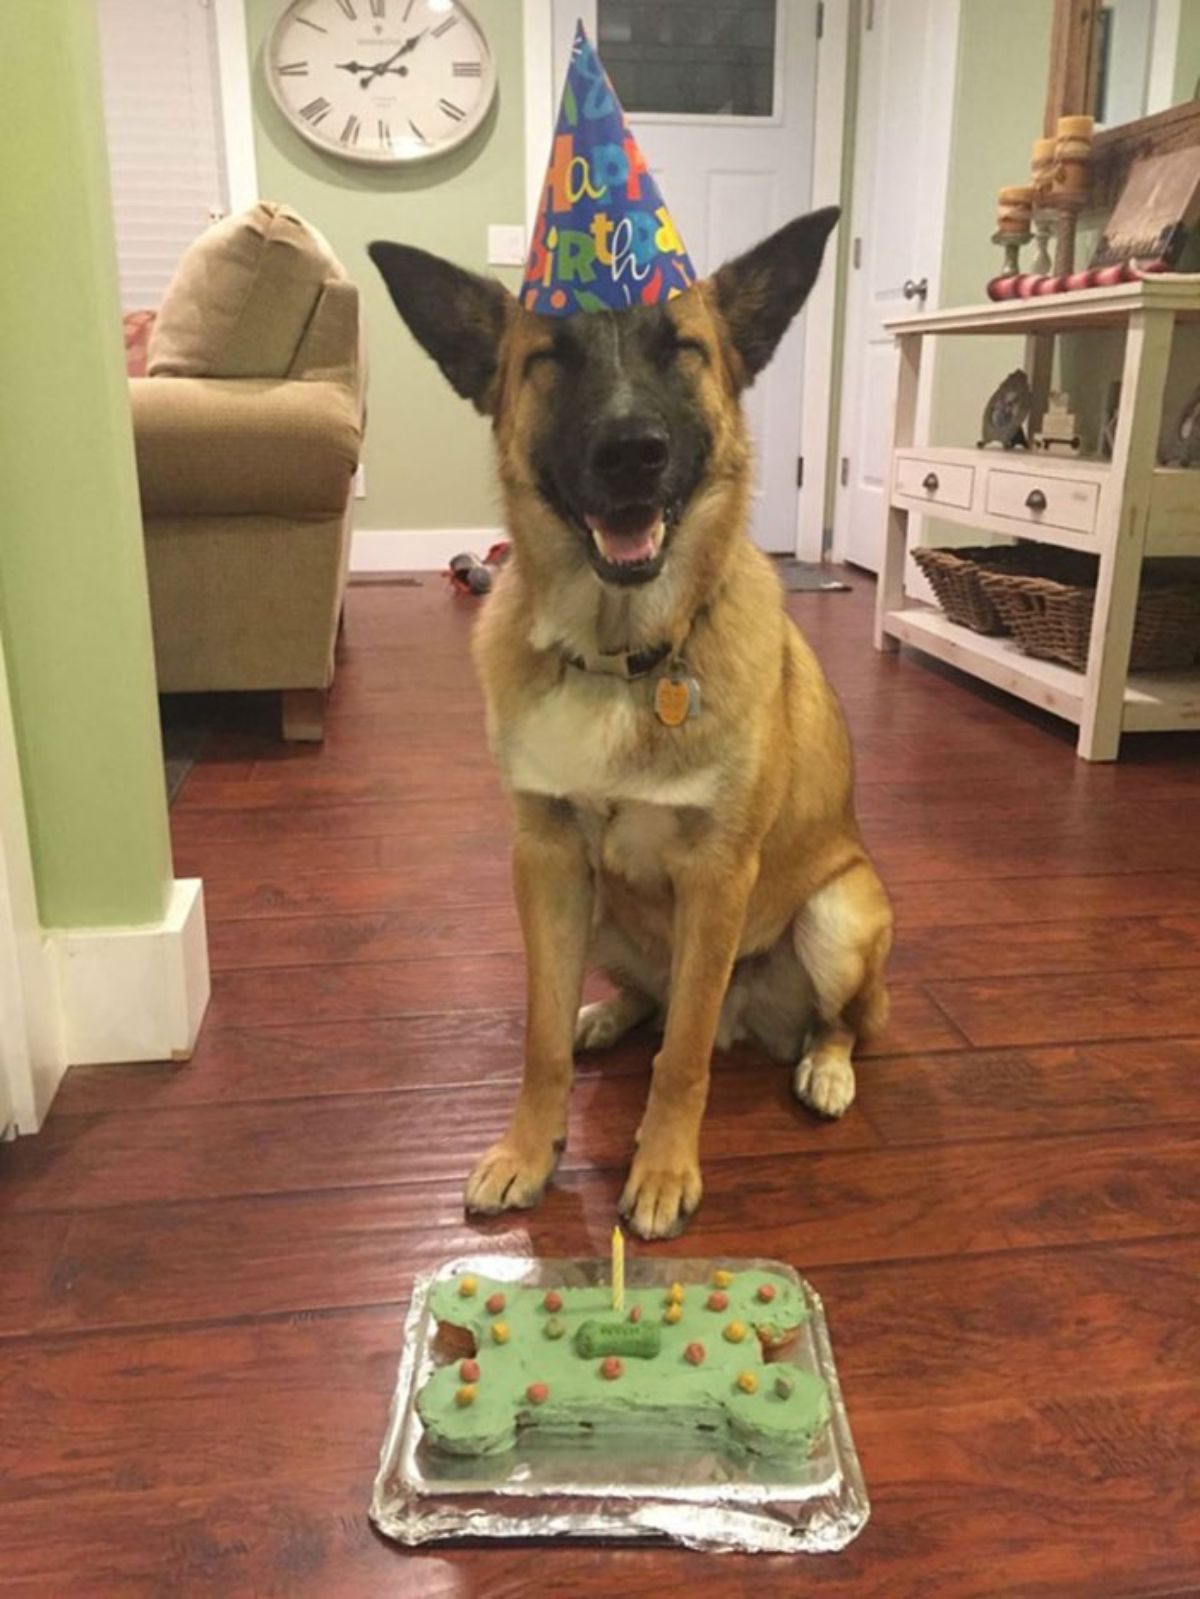 smiling brown and black dog wearing a colourful birthday party hat sitting in front of a blue bone-shaped birthday cake